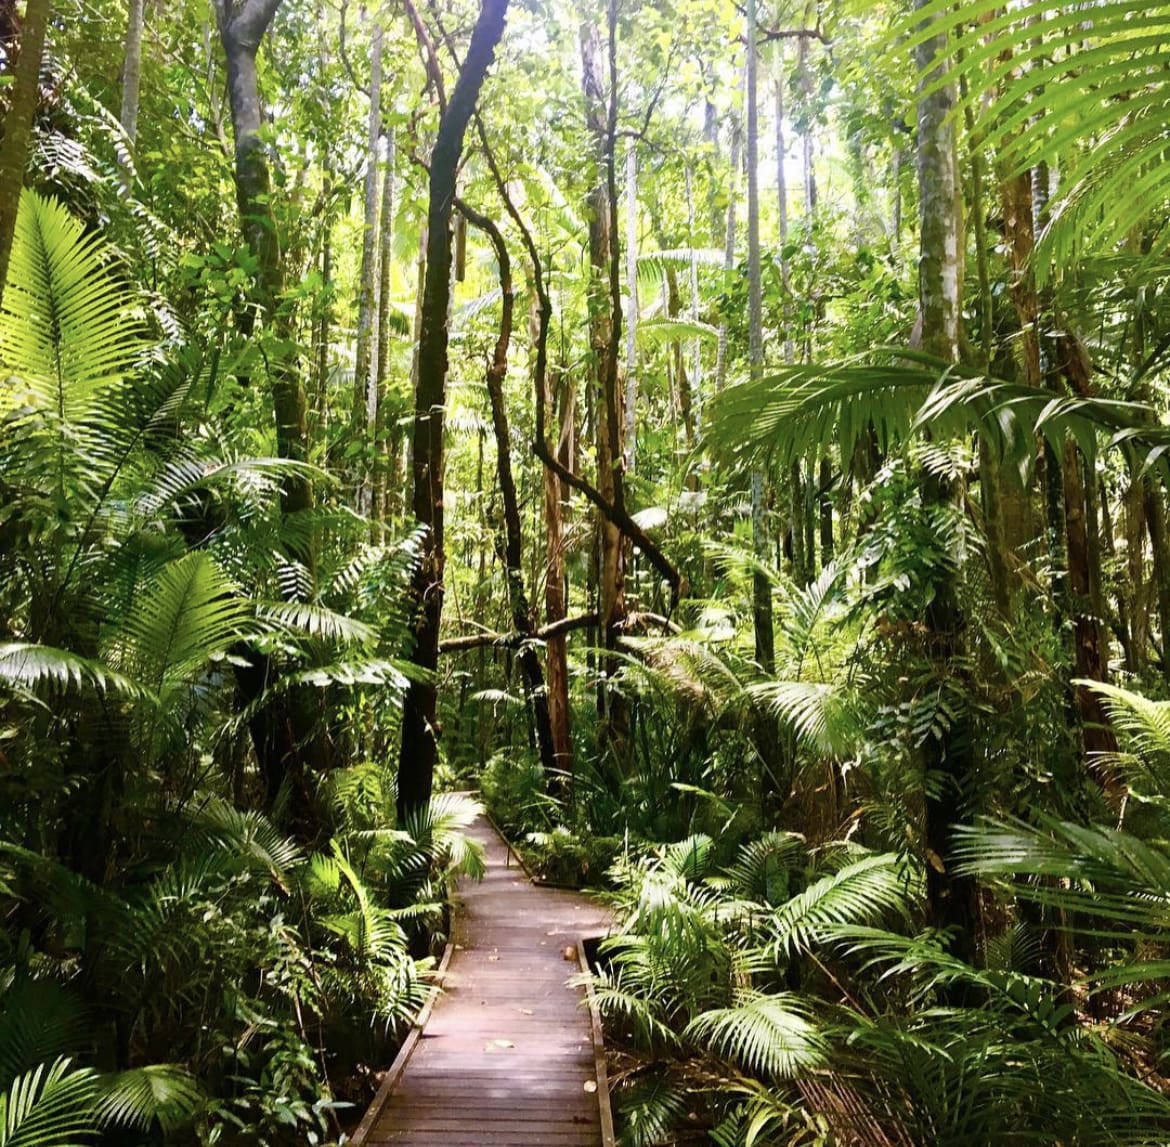 Cairns Botanic Gardens - The 20 Best Things to Do in Cairns, Australia